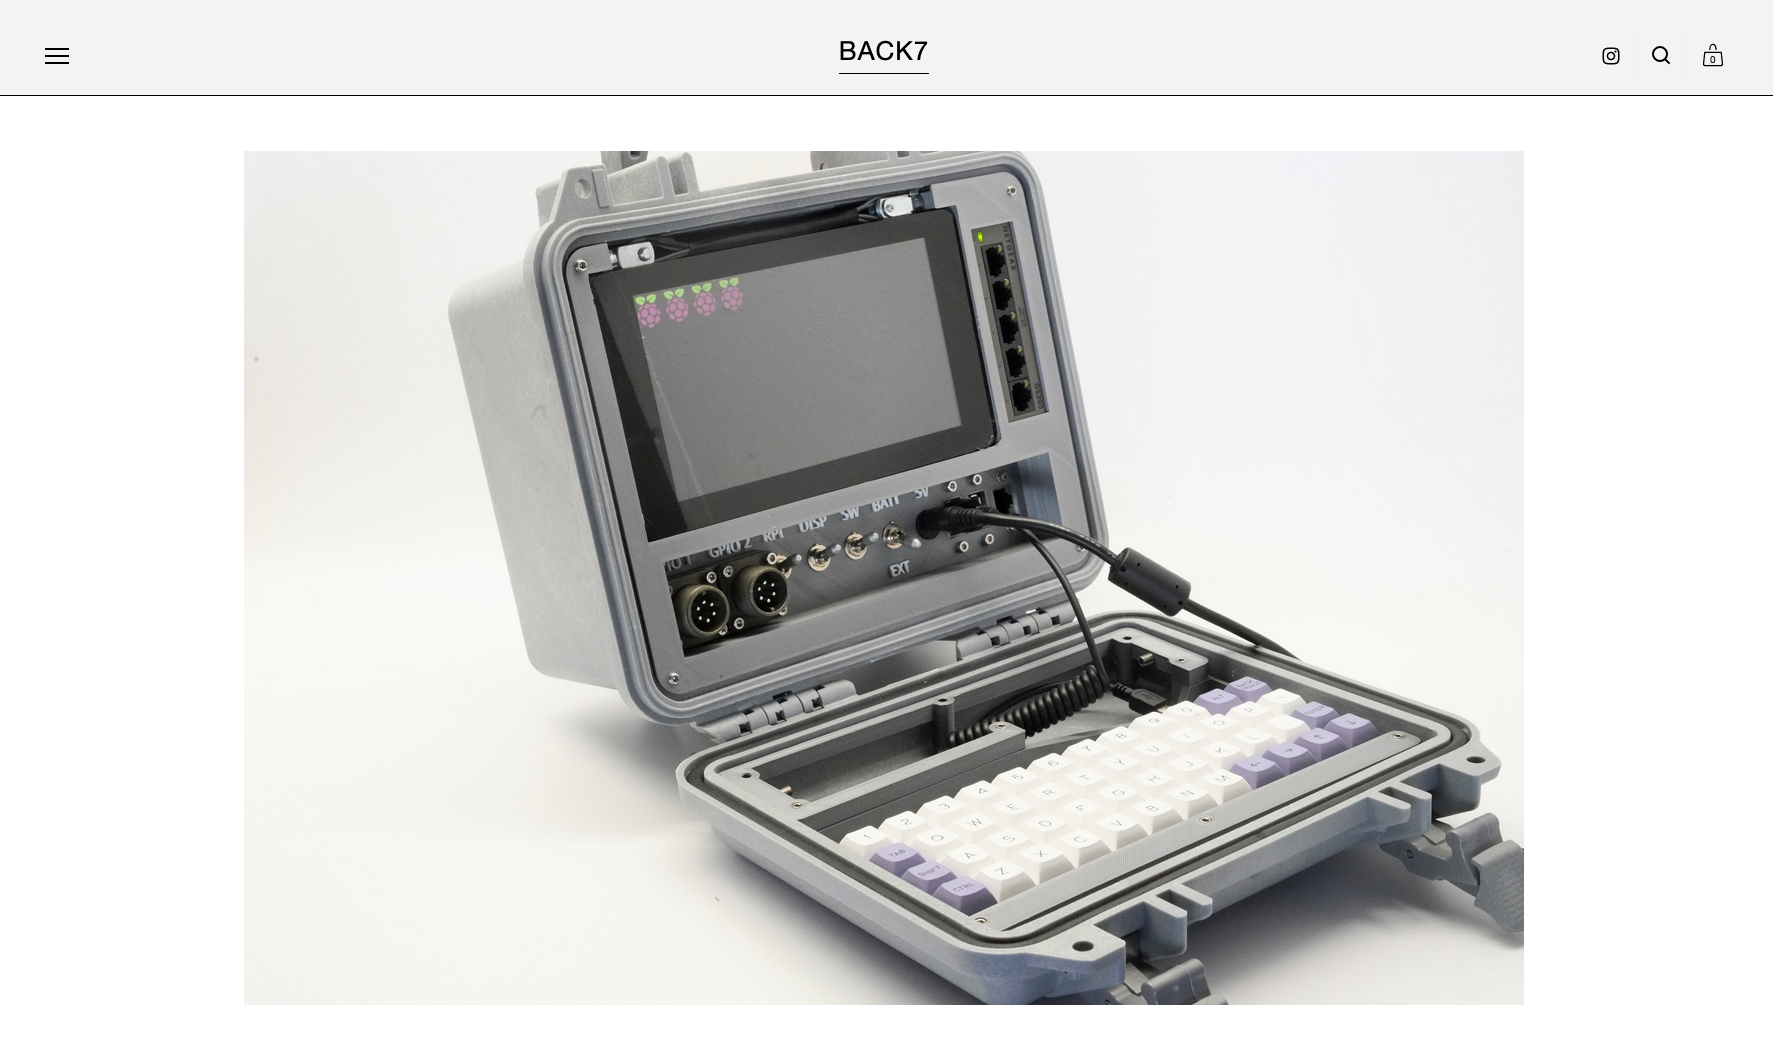 A screenshot showing a cyberdeck that has an open pelican case with a screen and keyboard inside